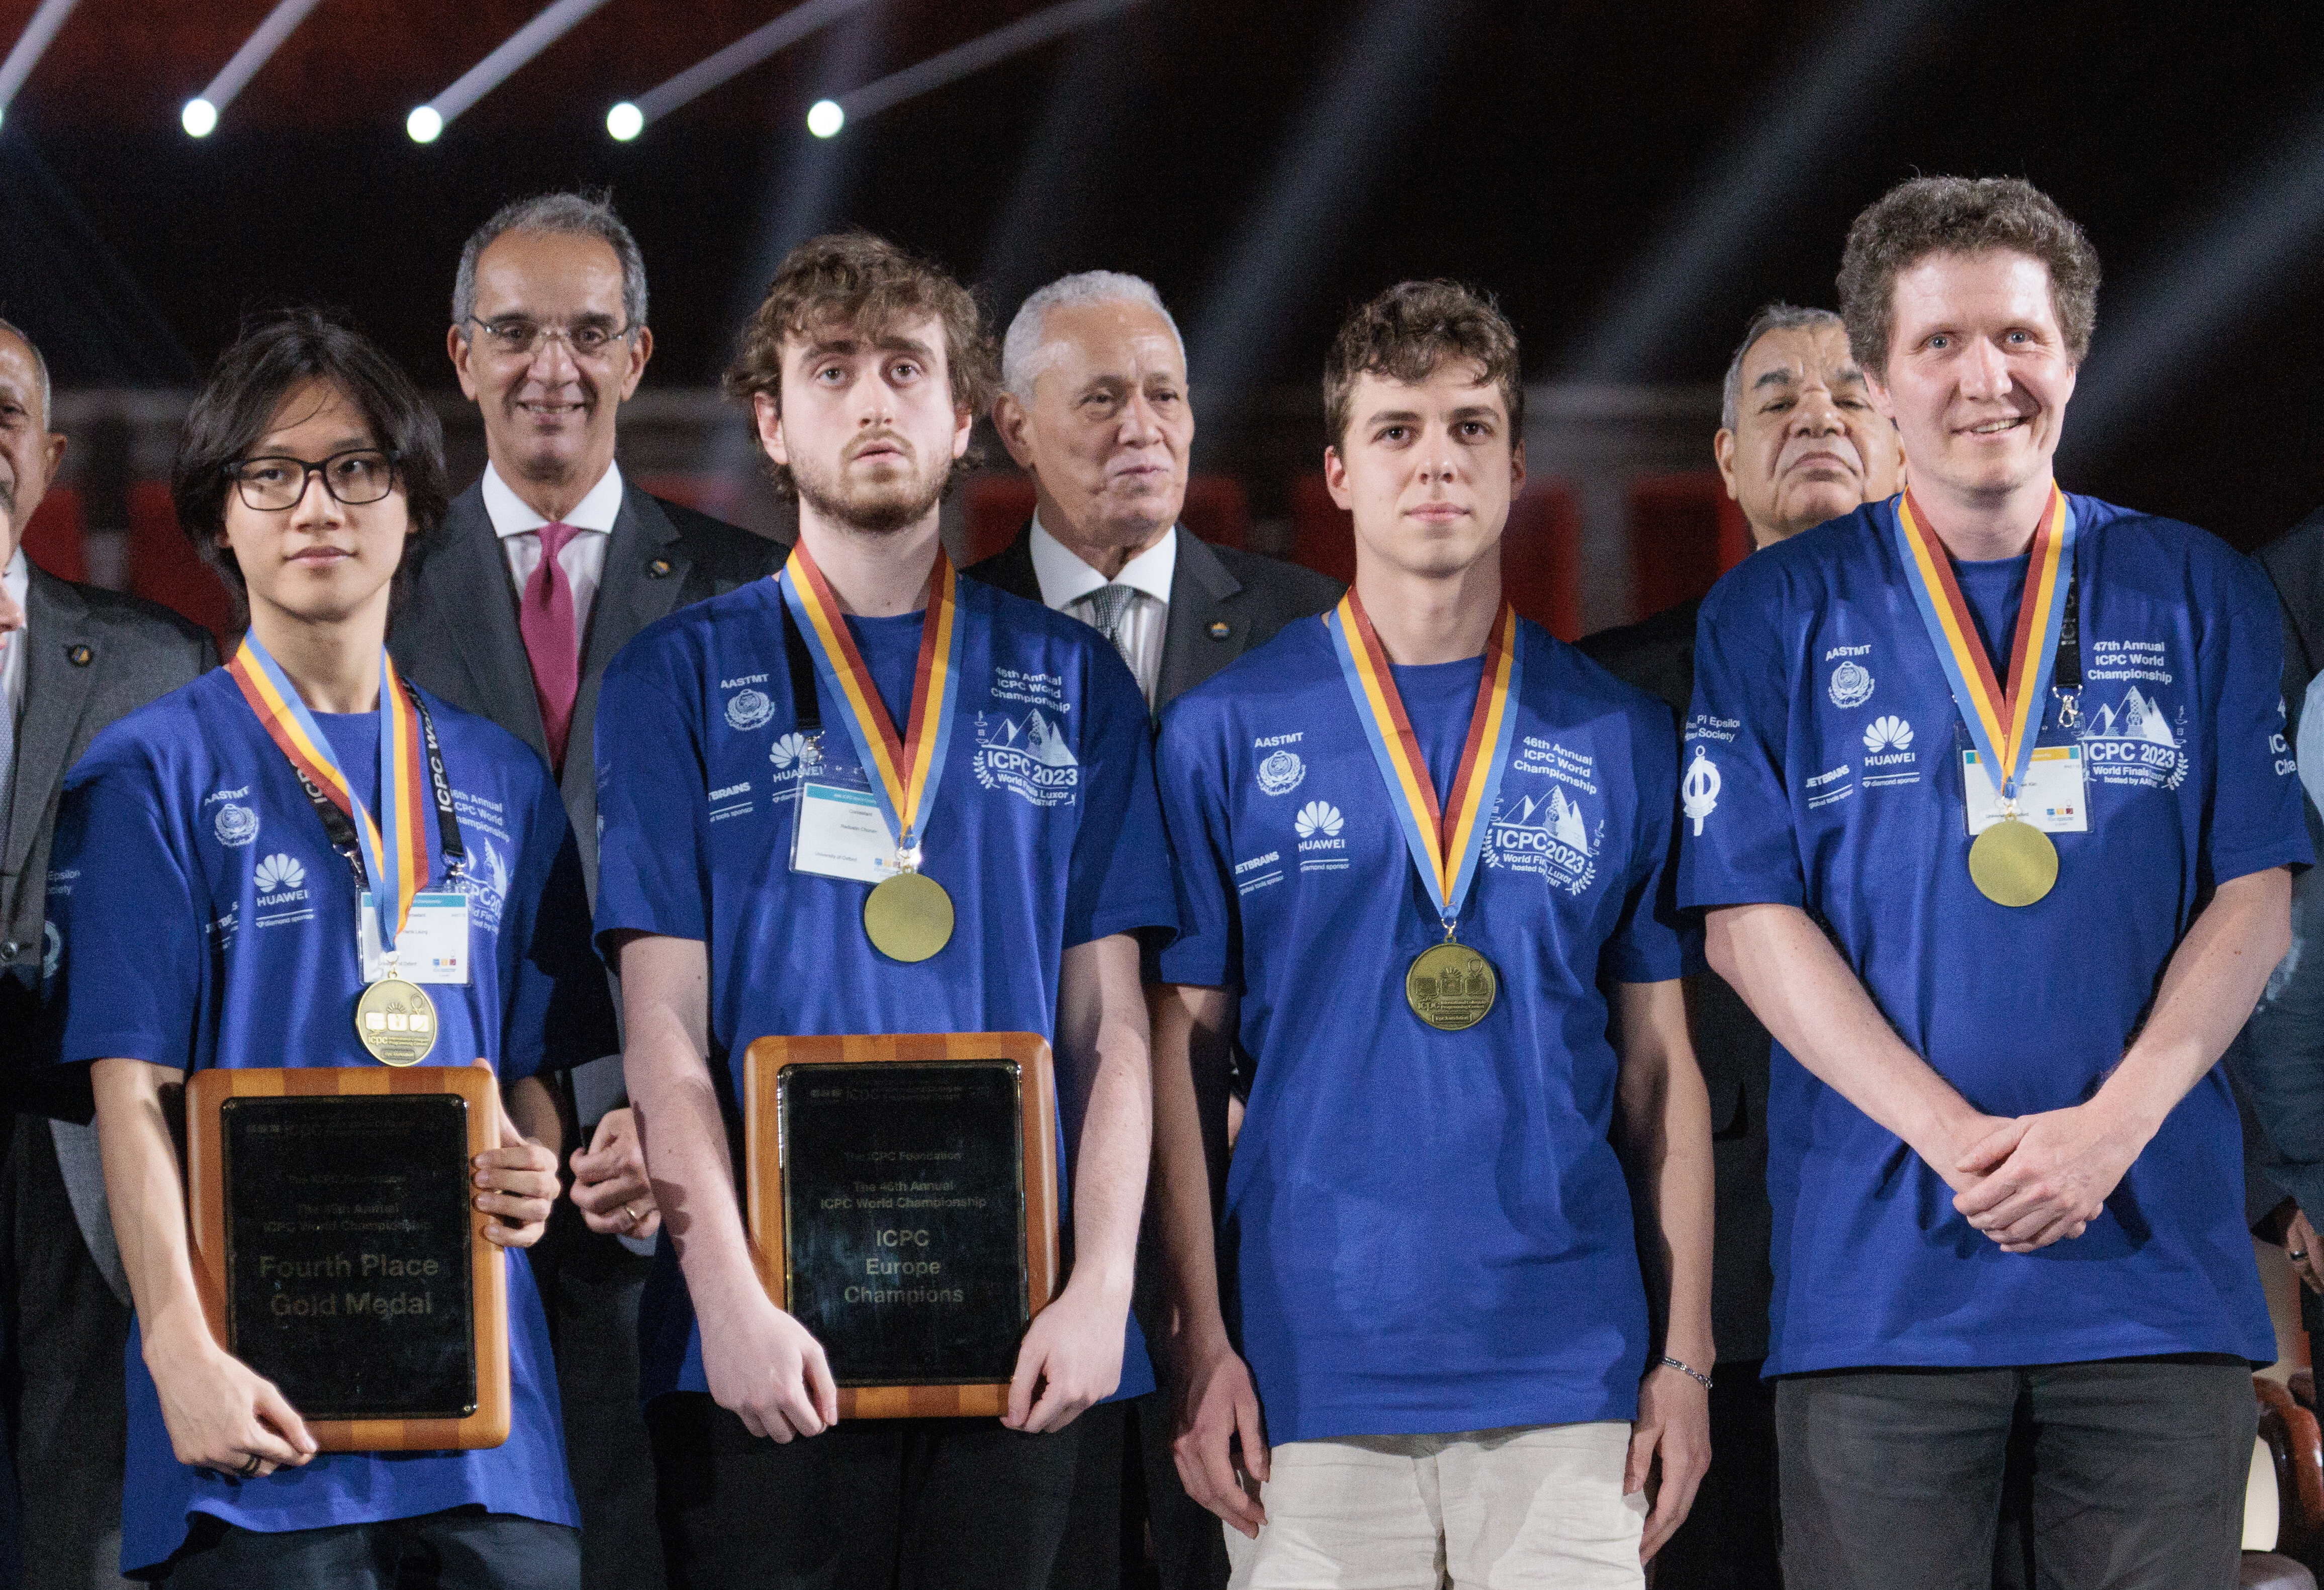 Triumph for Bulgarian students at the International Collegiate Programming Contest (ICPC)